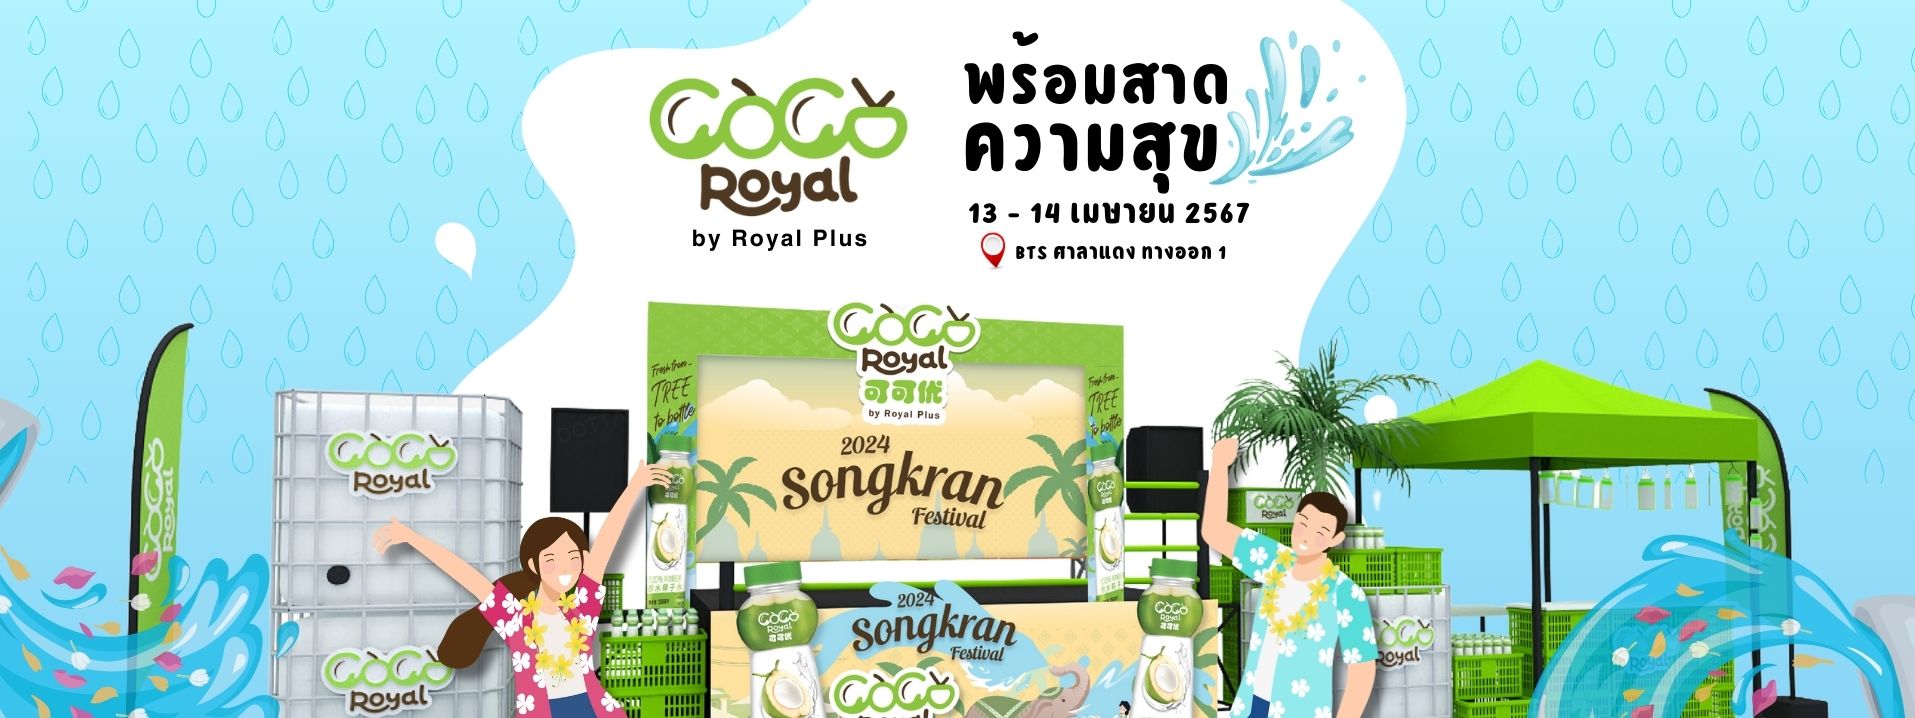 Happy Songkran Day! Meet COCO ROYAL @Silom Road!!! Get ready to splash with joy to welcome tourists from around the world on April 13-14. Let's make a splash together!